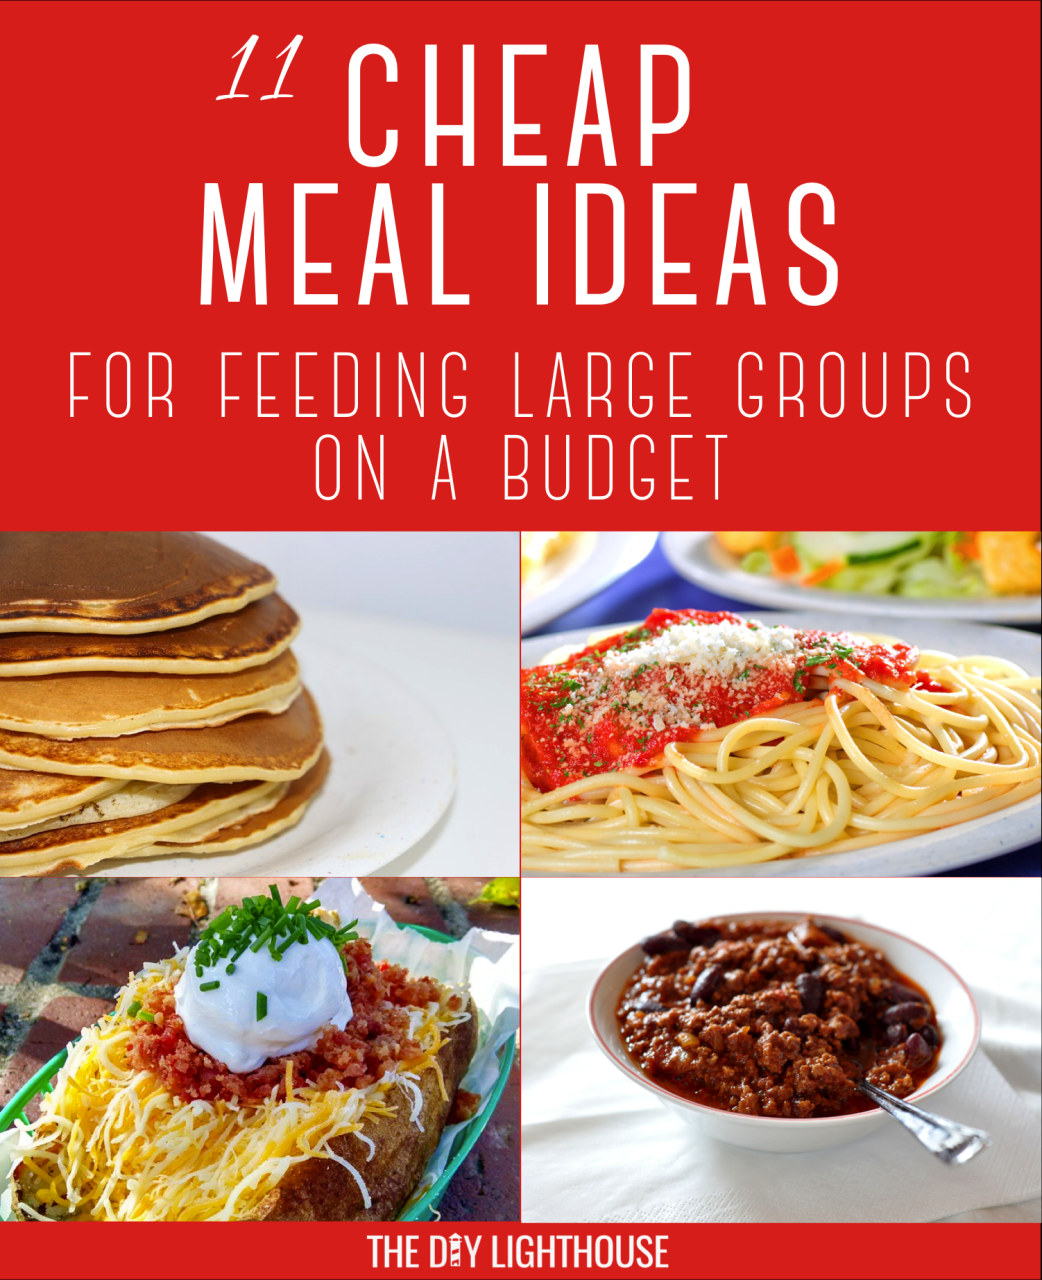 Economical Meals For Large Groups